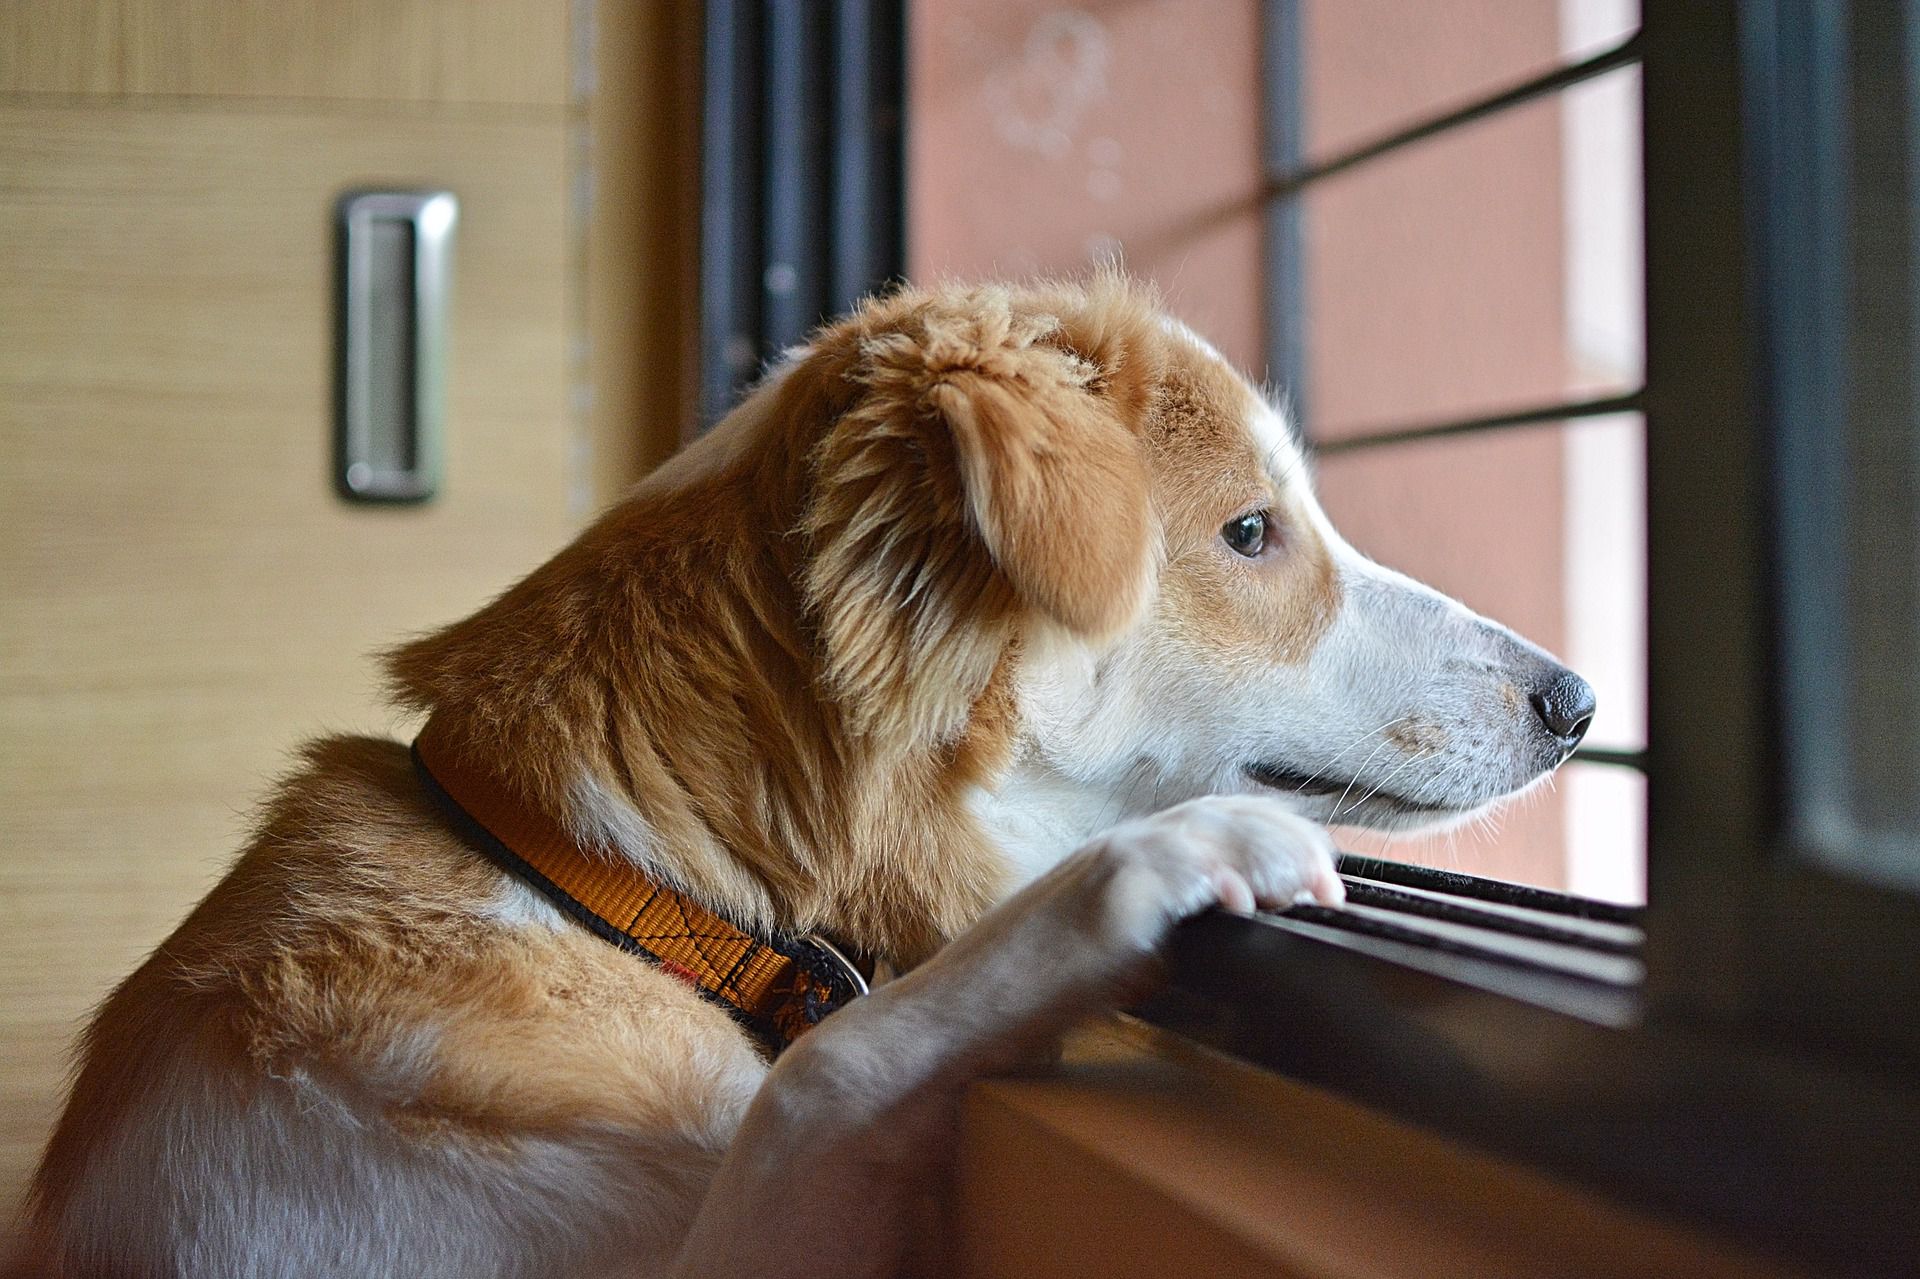 How to Make Sure Your Pets are Safe When You’re Not Home